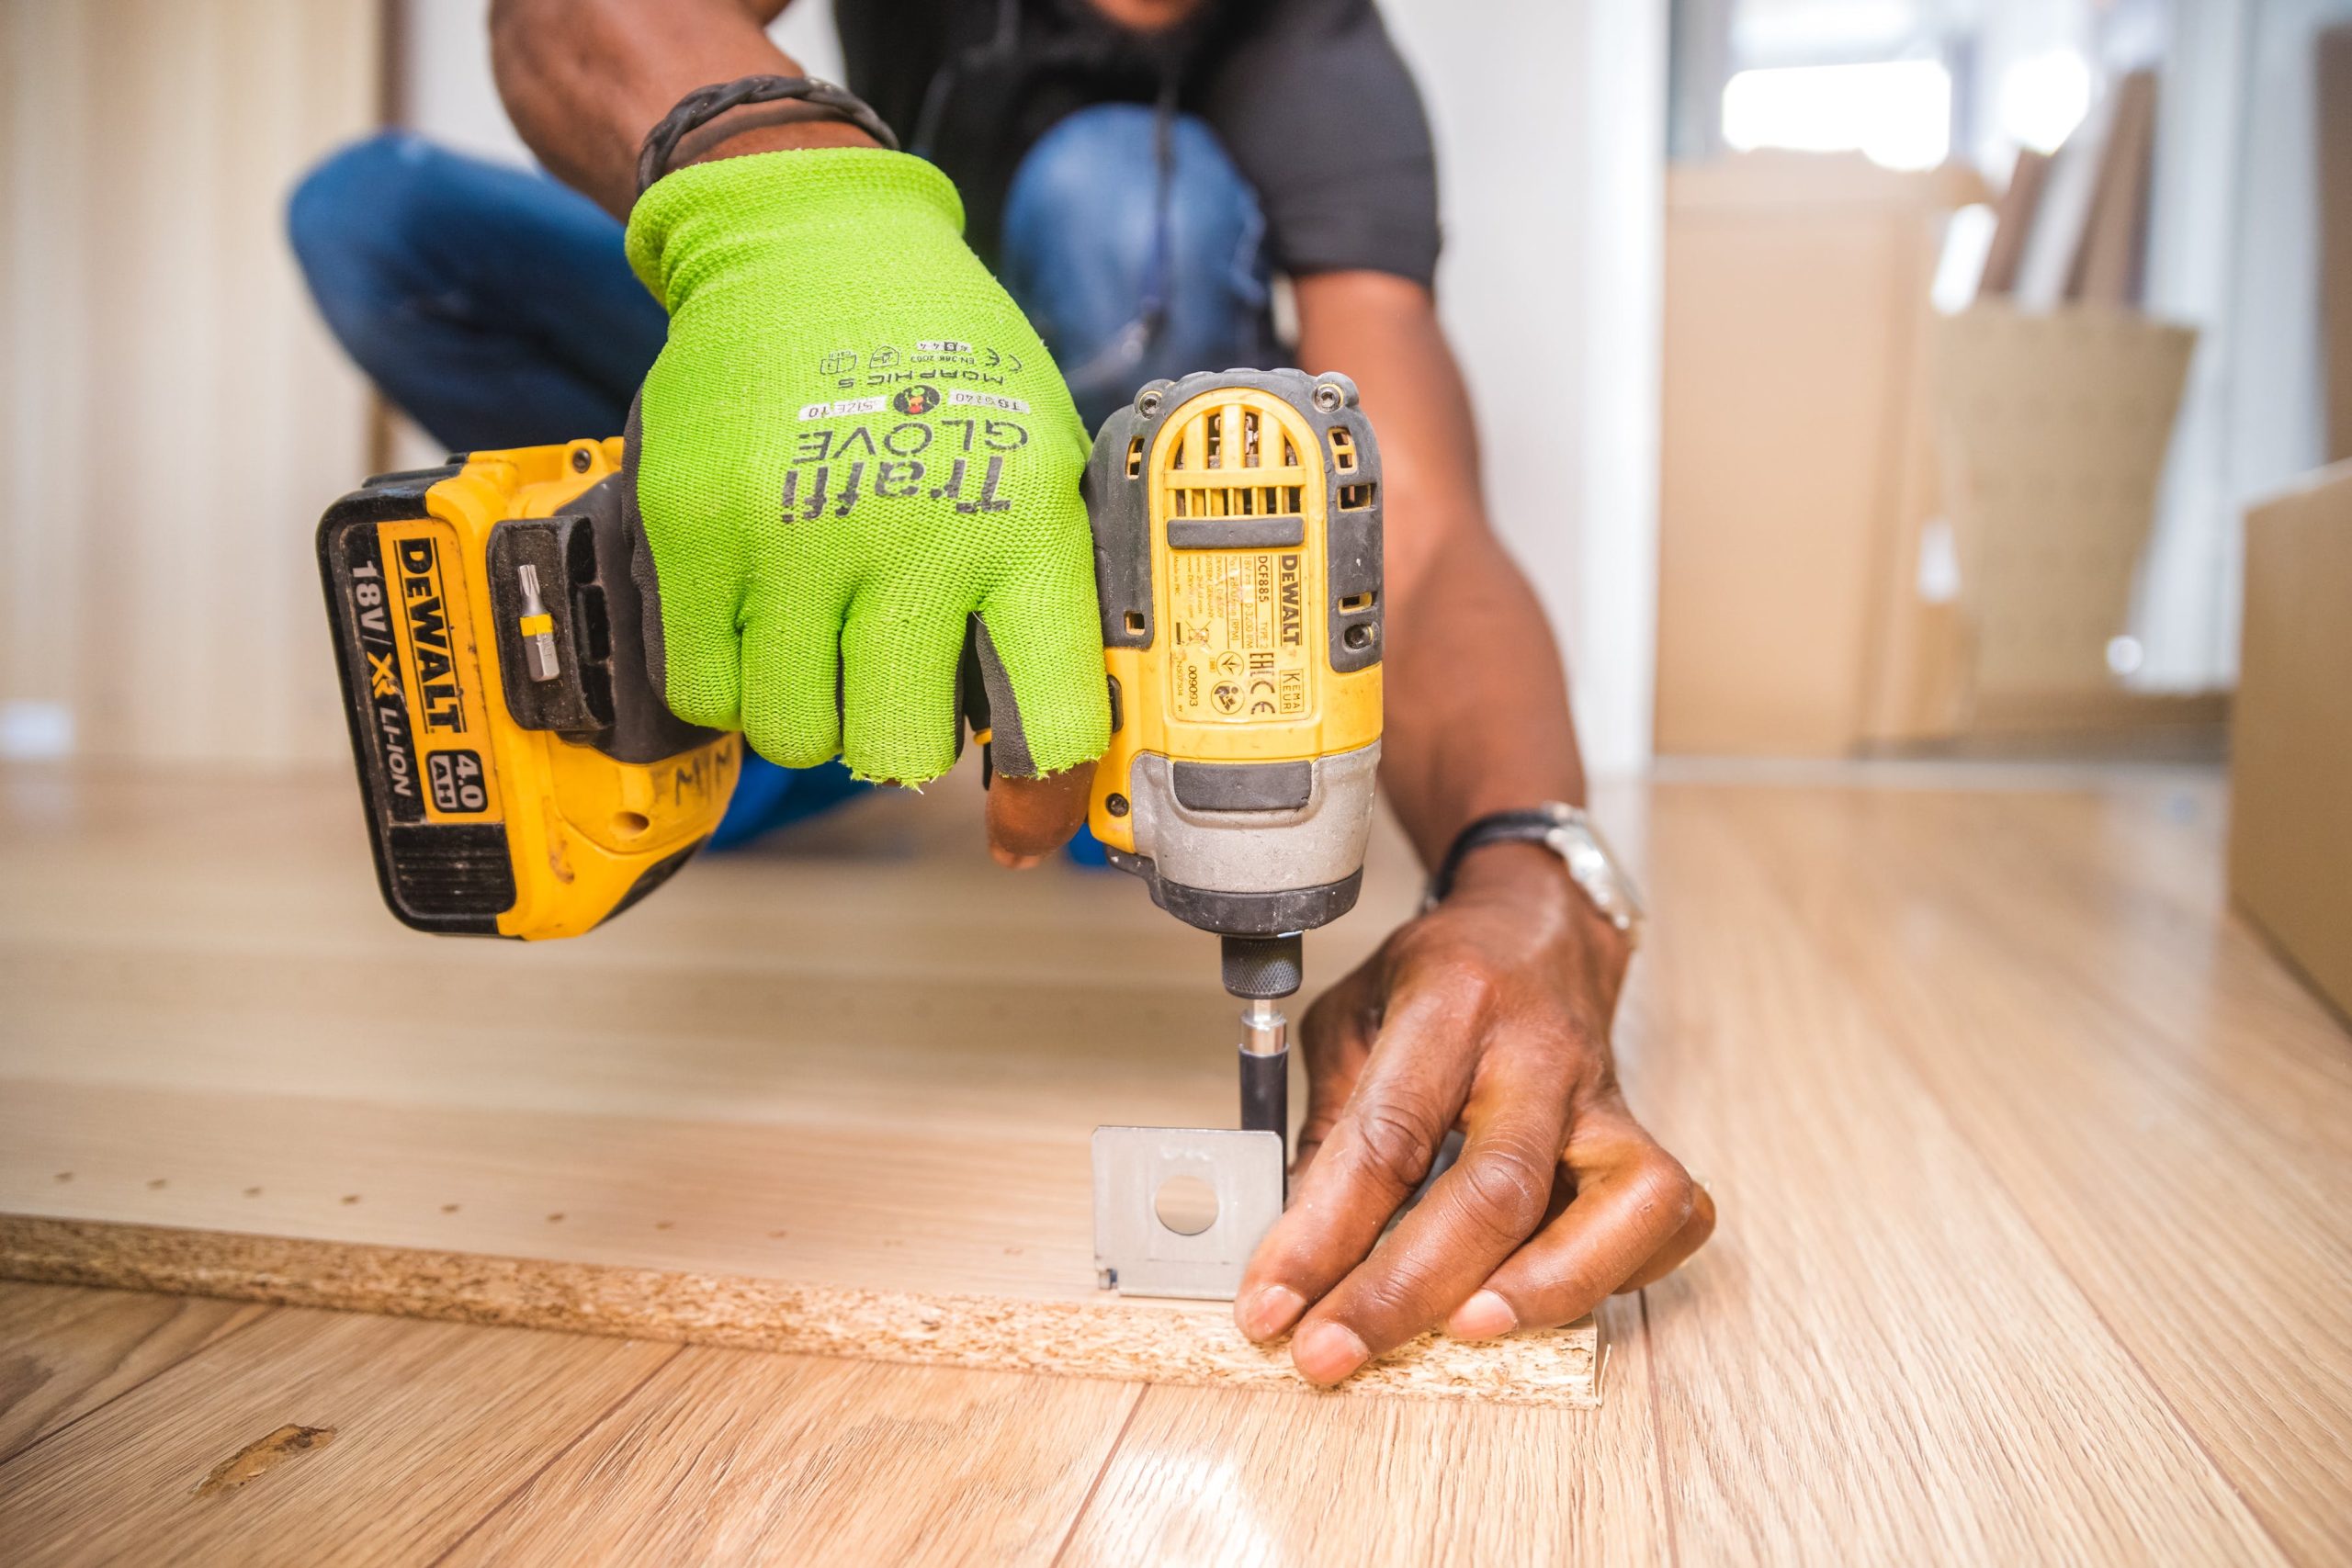 Handyman Solutions: Your One-Stop Shop for Home Repairs and Improvements in Metro Detroit